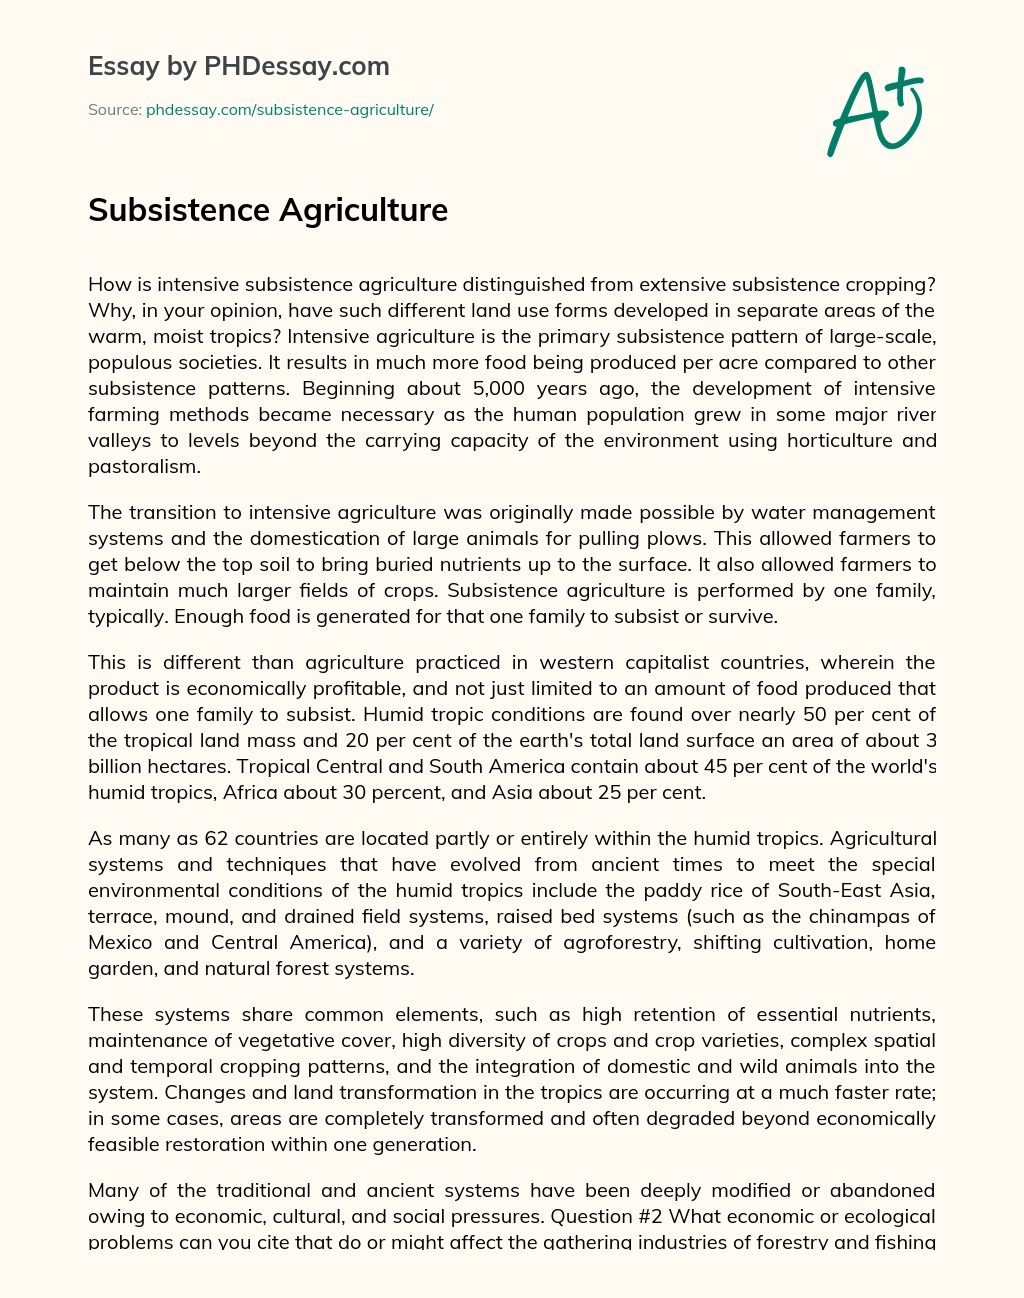 Subsistence Agriculture essay